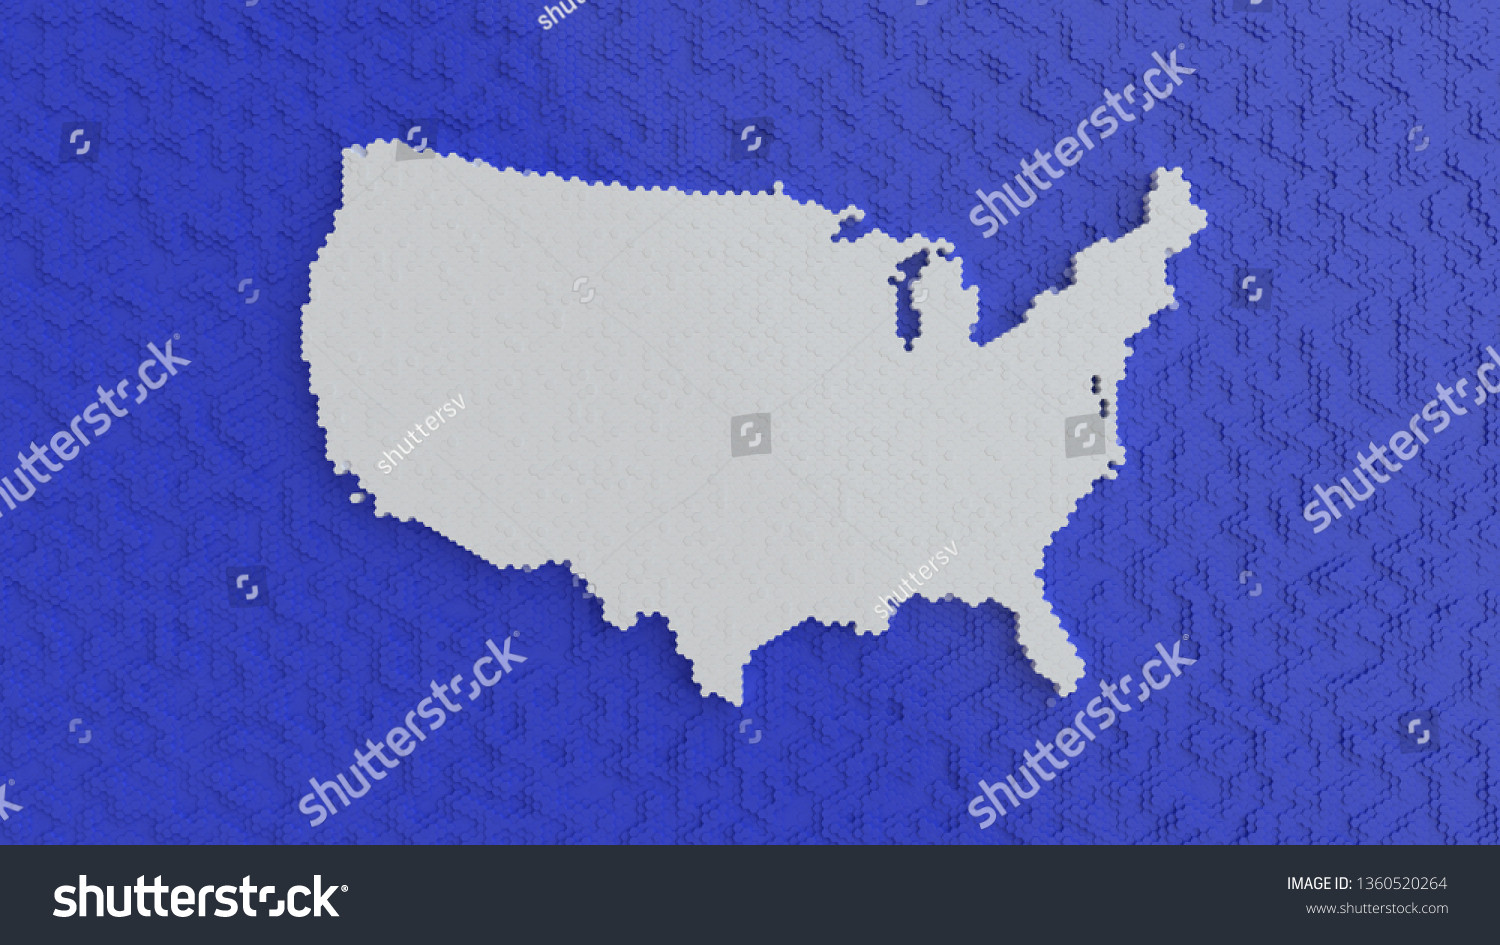 Stock Photo  D United States Map Hexagonal Abstract Background Digital Economy 1360520264 